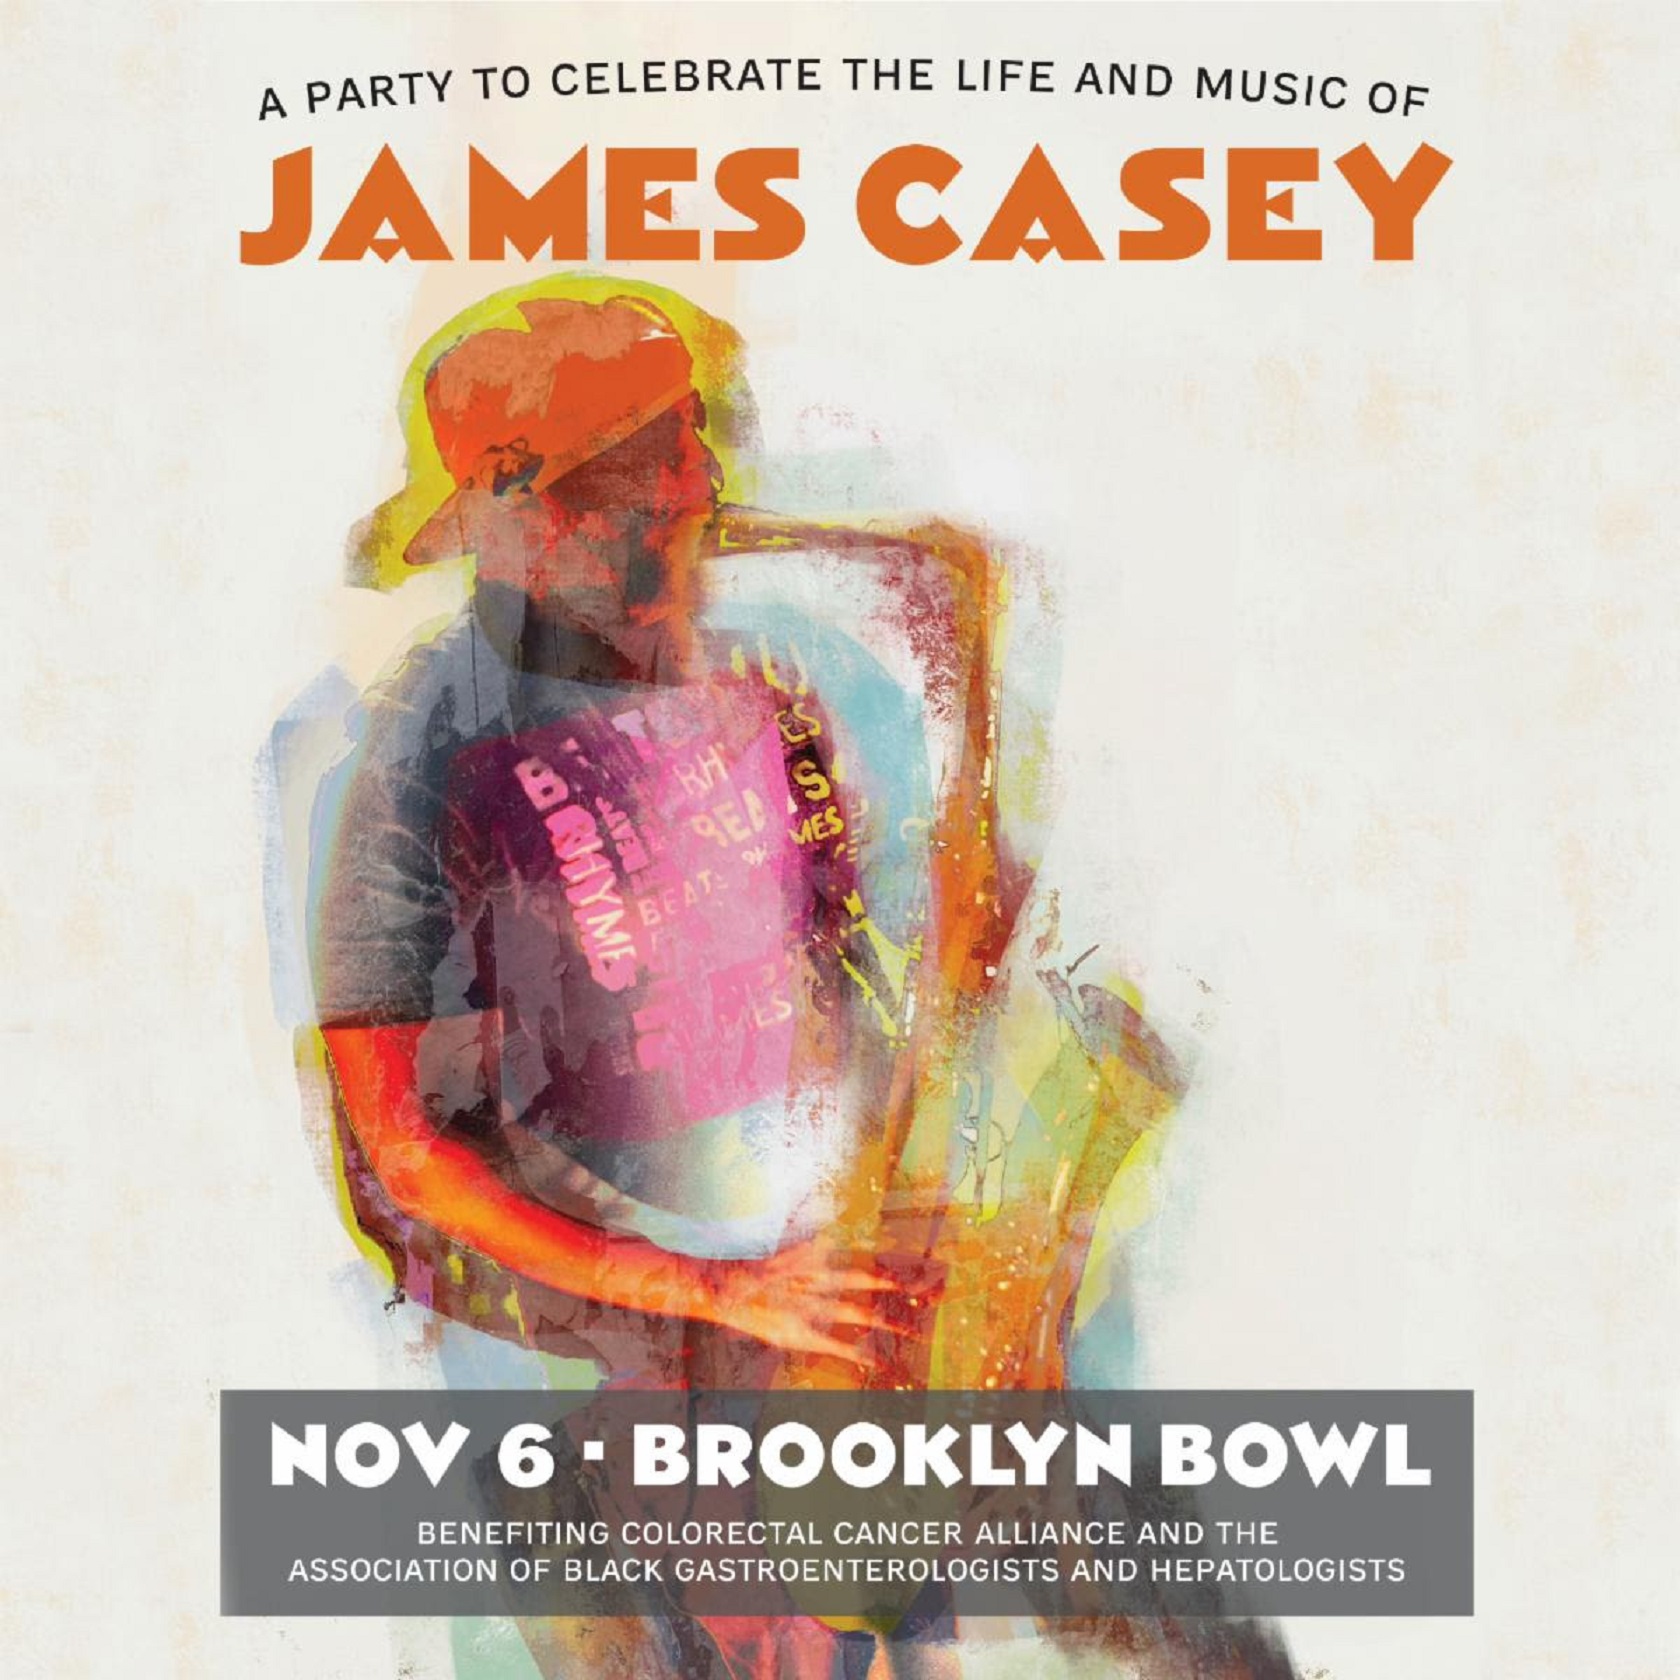  James Casey Celebration of Life Concert Announces Limited-Edition Merch, Streaming Partner for Nov. 6 Brooklyn Bowl Event